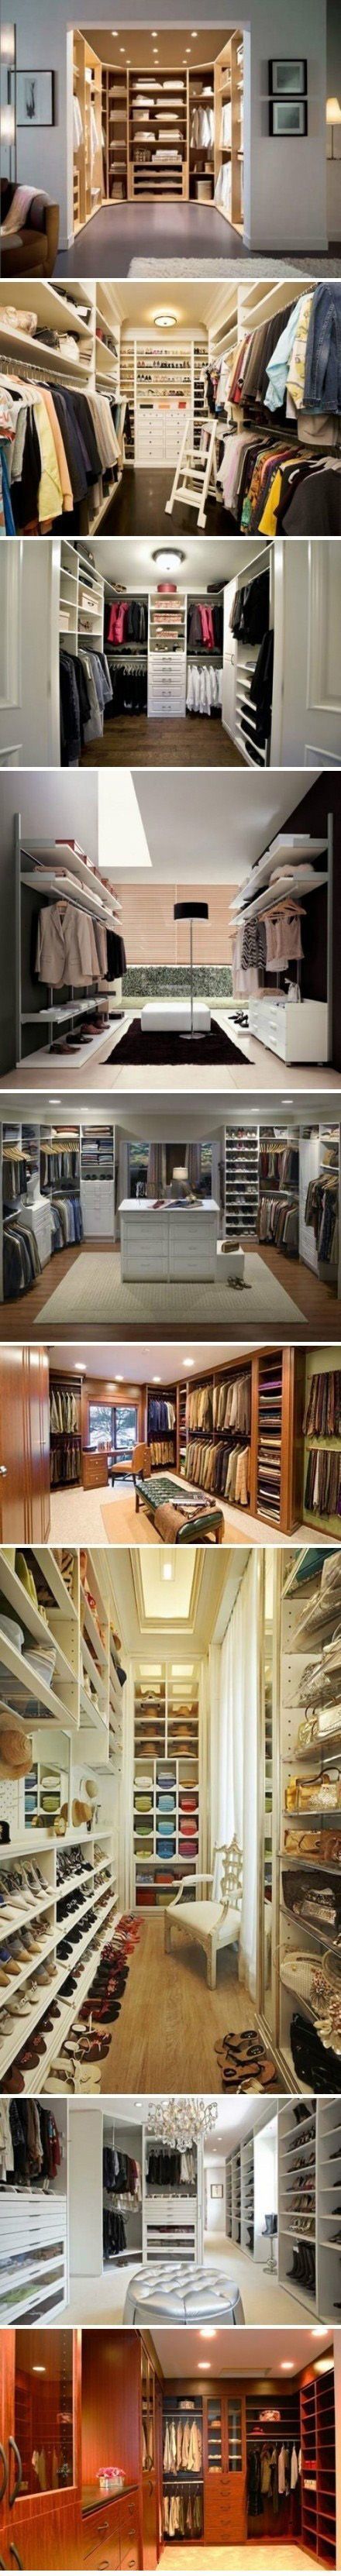 Walk-in closets! Hey, a girl can dream!